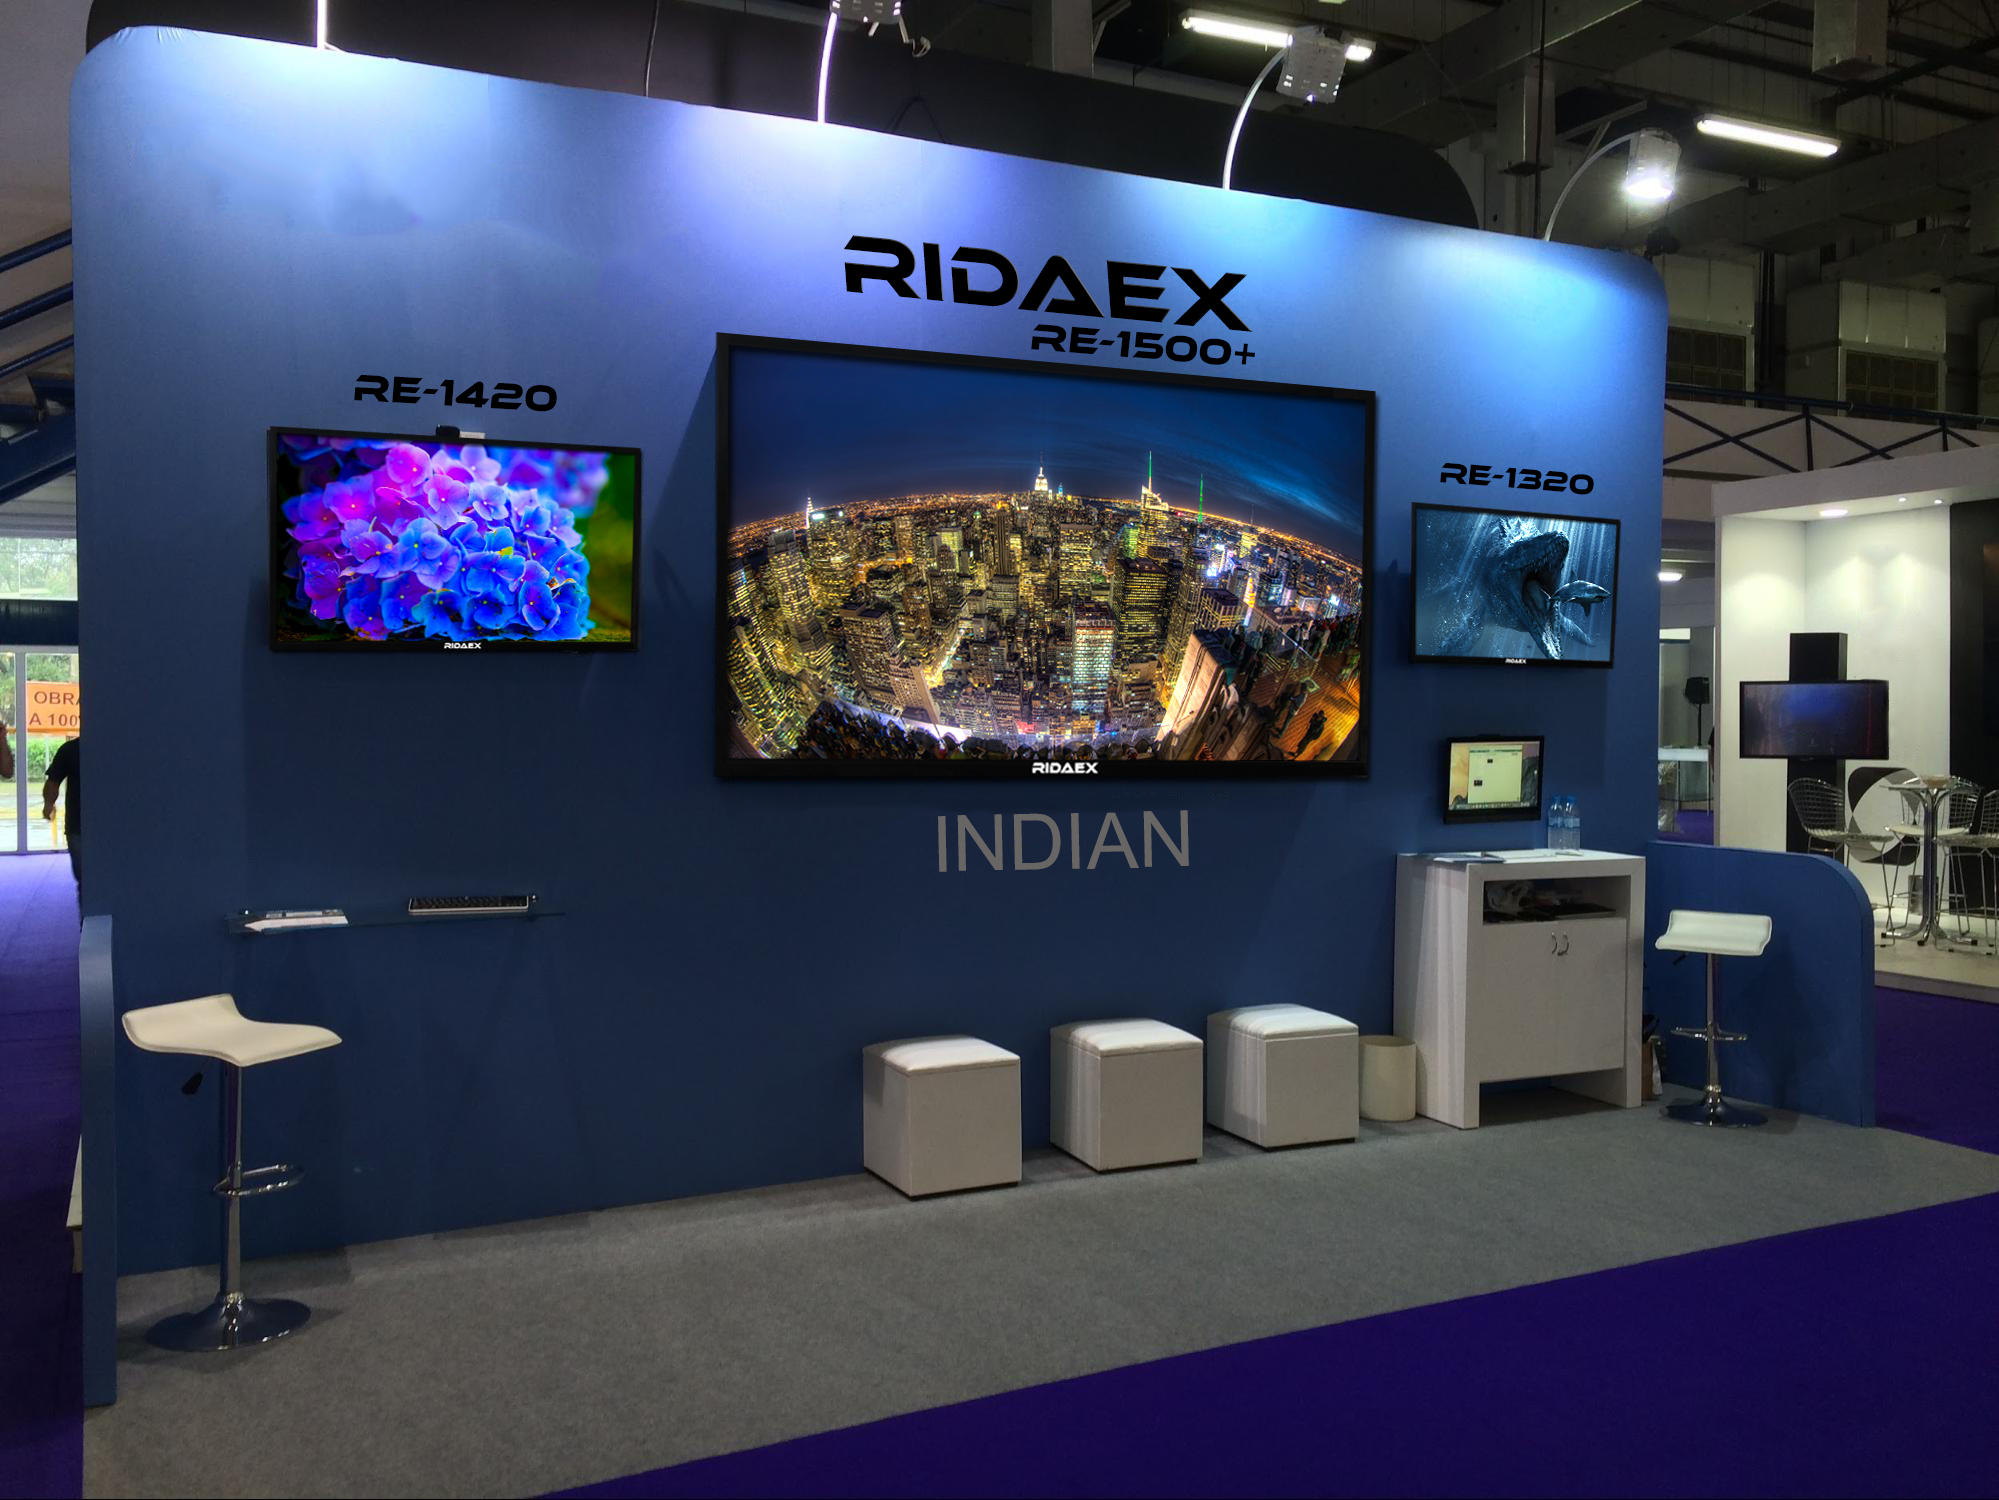 RIDAEX, The Indian player conquering the new gen smart TV market introduces RE PRO 2019 models 2